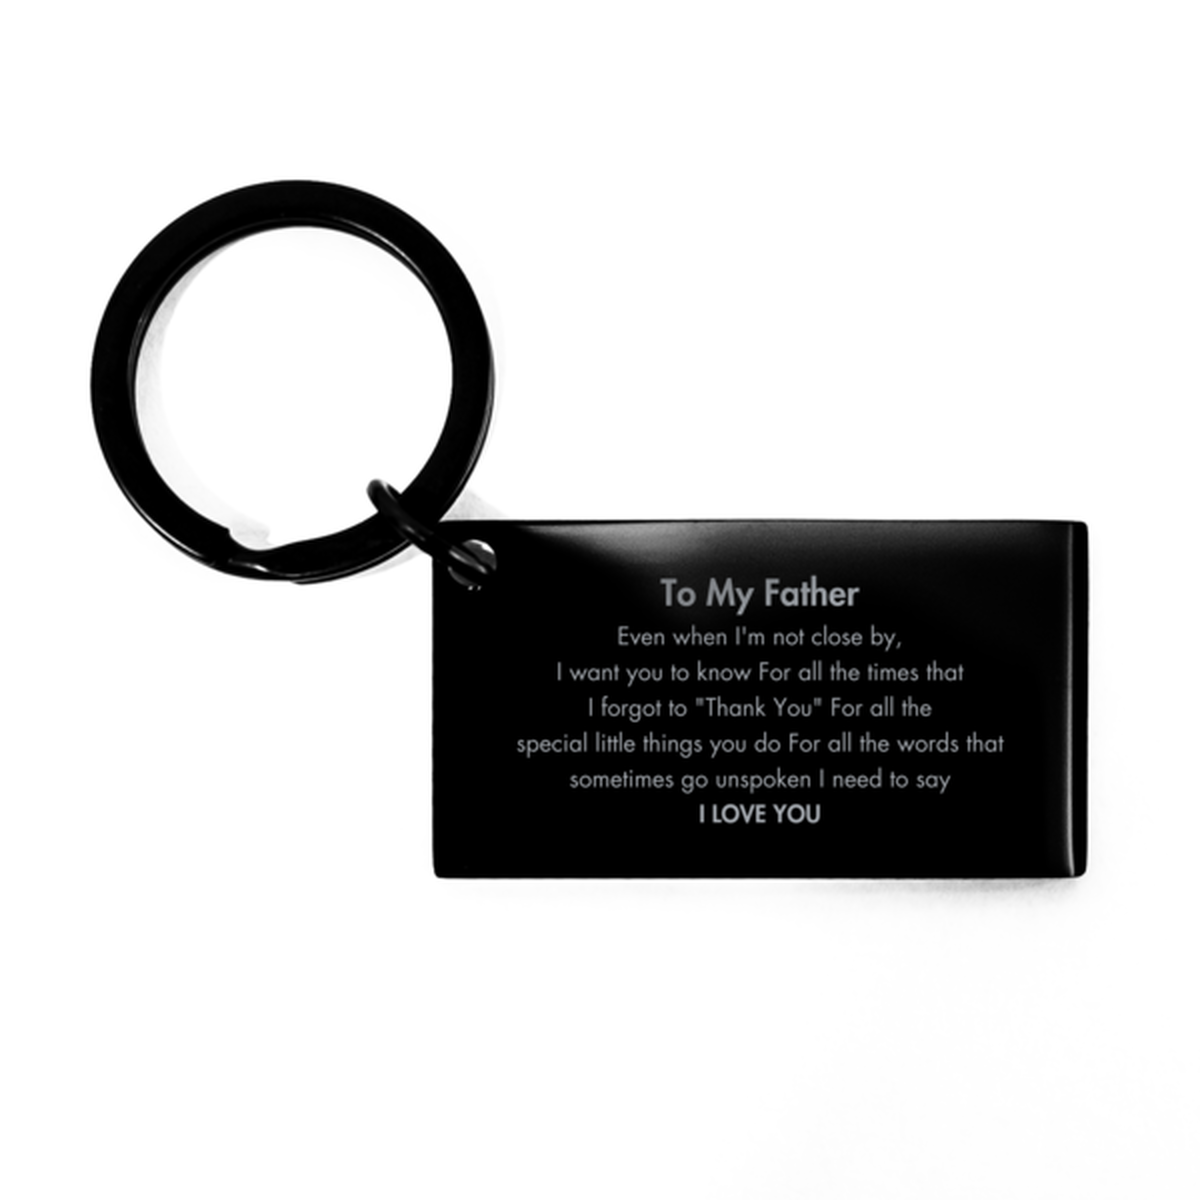 Thank You Gifts for Father, Keepsake Keychain Gifts for Father Birthday Mother's day Father's Day Father For all the words That sometimes go unspoken I need to say I LOVE YOU